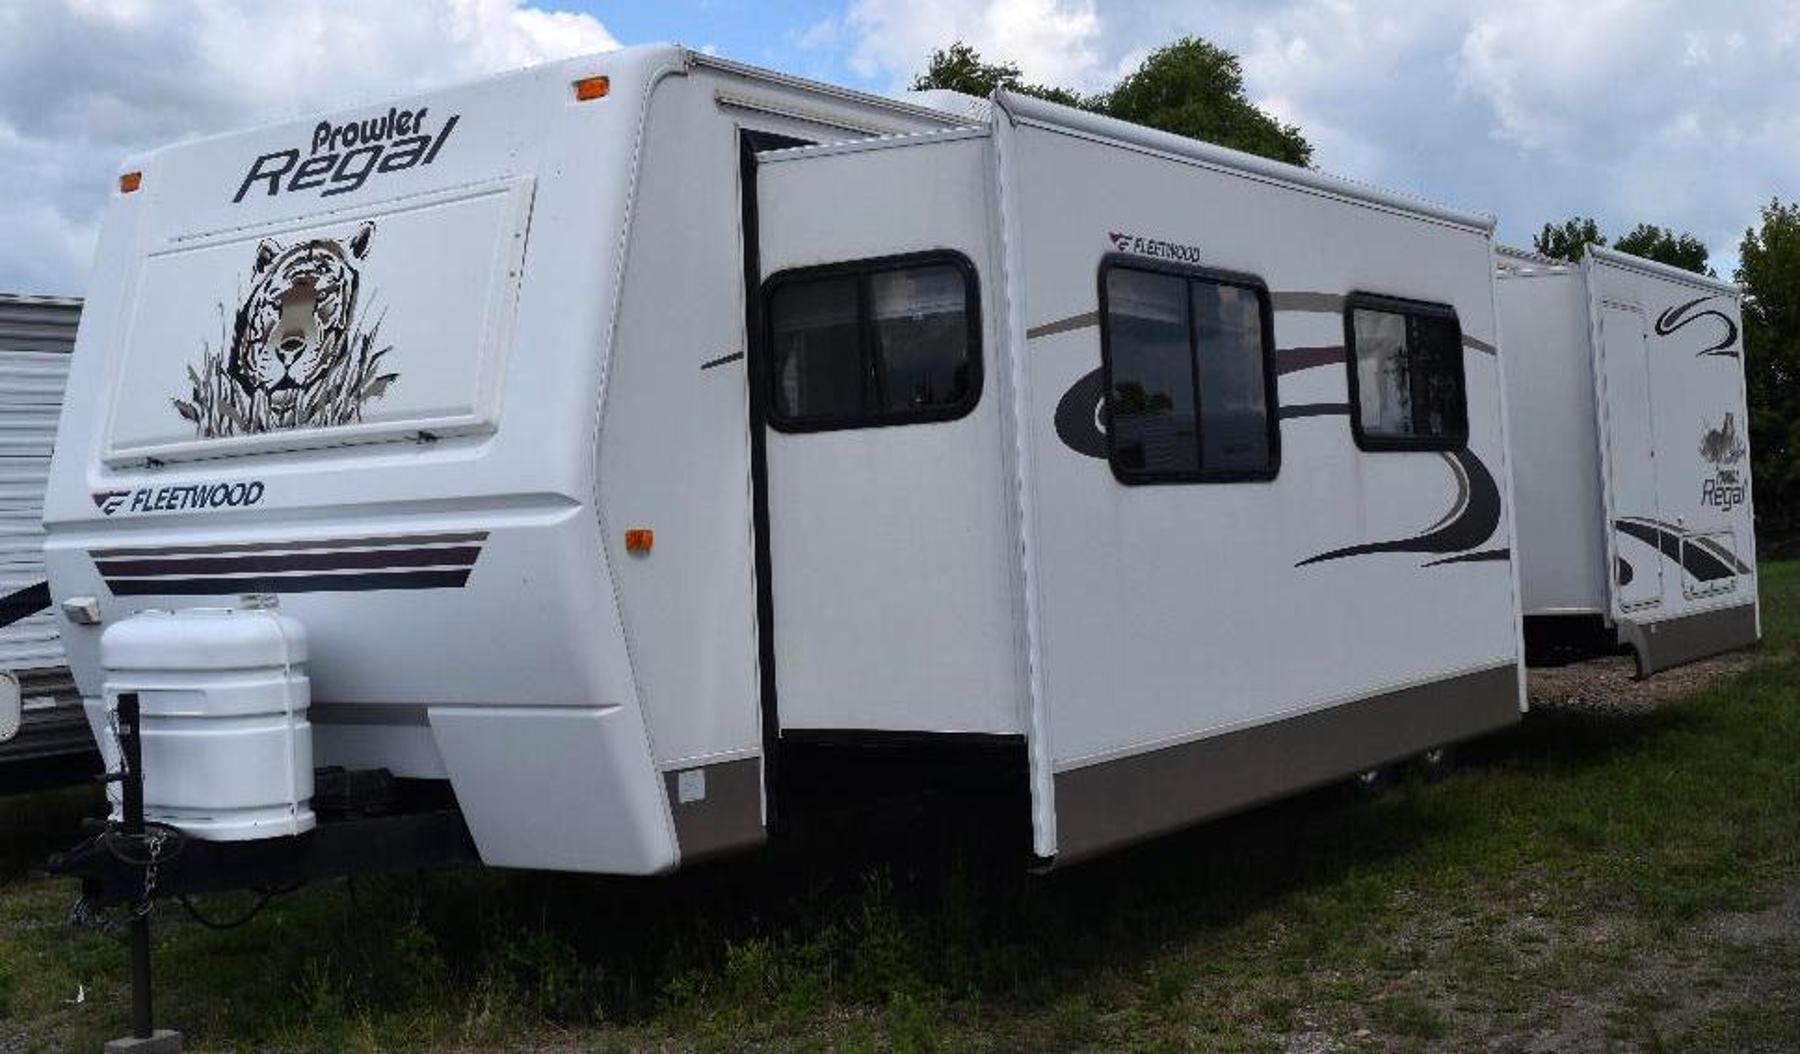 Motorhomes, Travel Trailers and 5th Wheel Campers